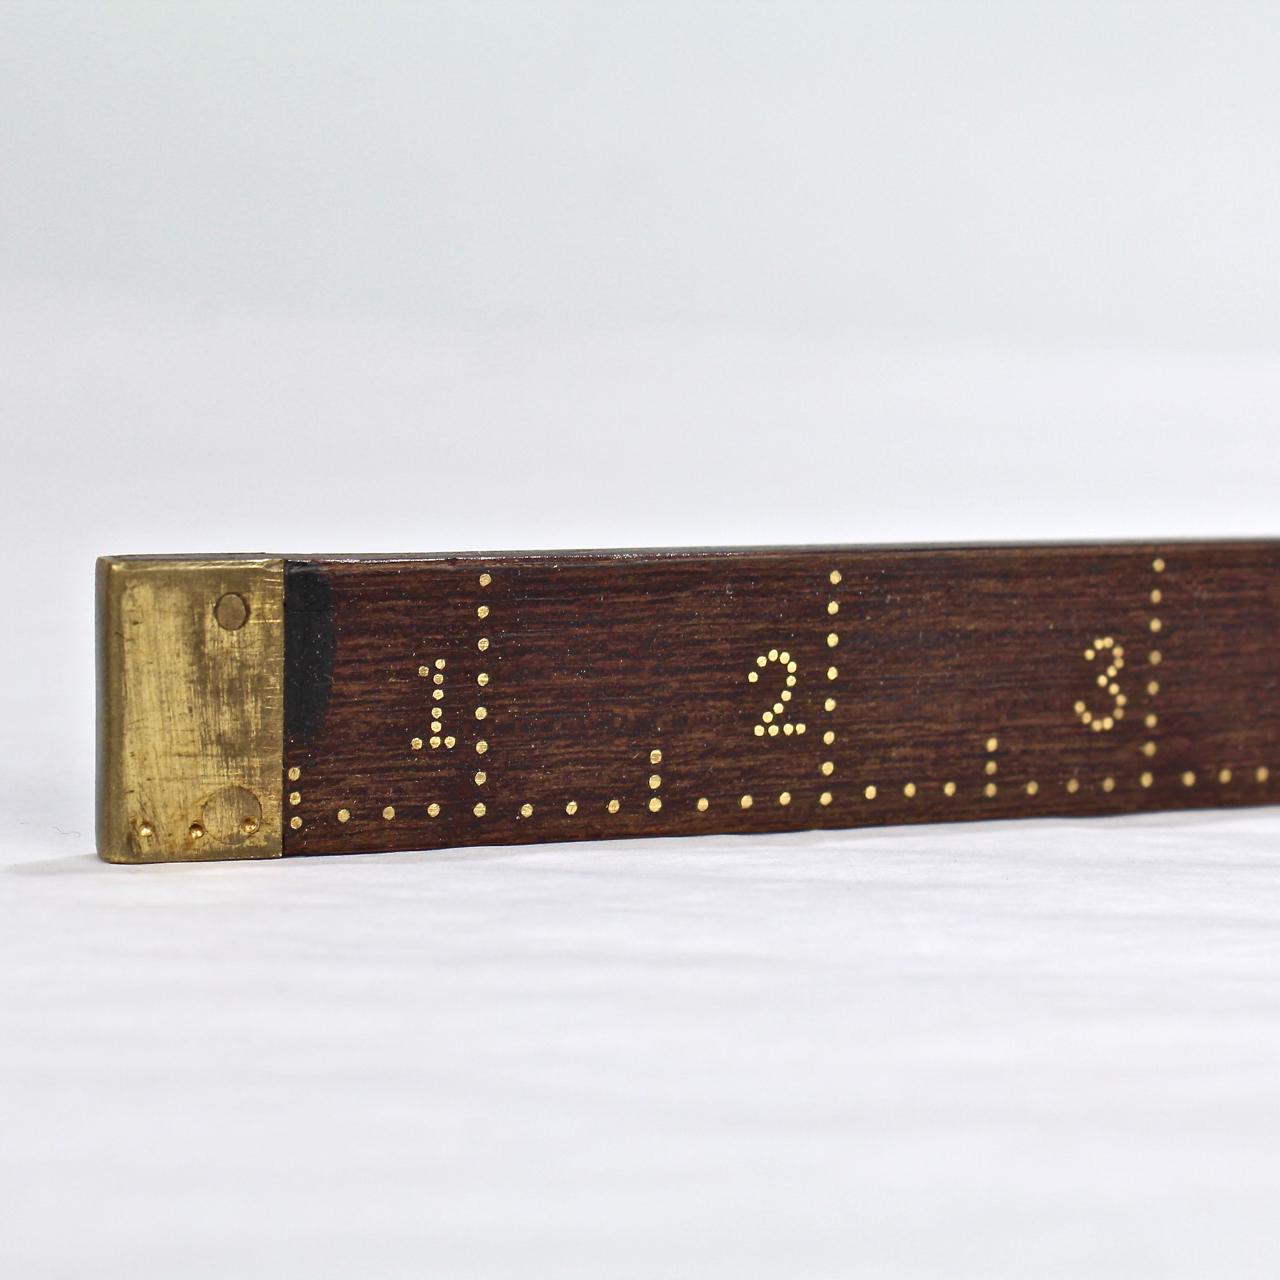 A wonderful antique handmade dress maker's ruler in rosewood with brass inlay.

Found in Pennsylvania, this measuring stick was meticulously inlaid with brass nails to mark each inch (and even fractional inches). 

It is in incredibly detailed